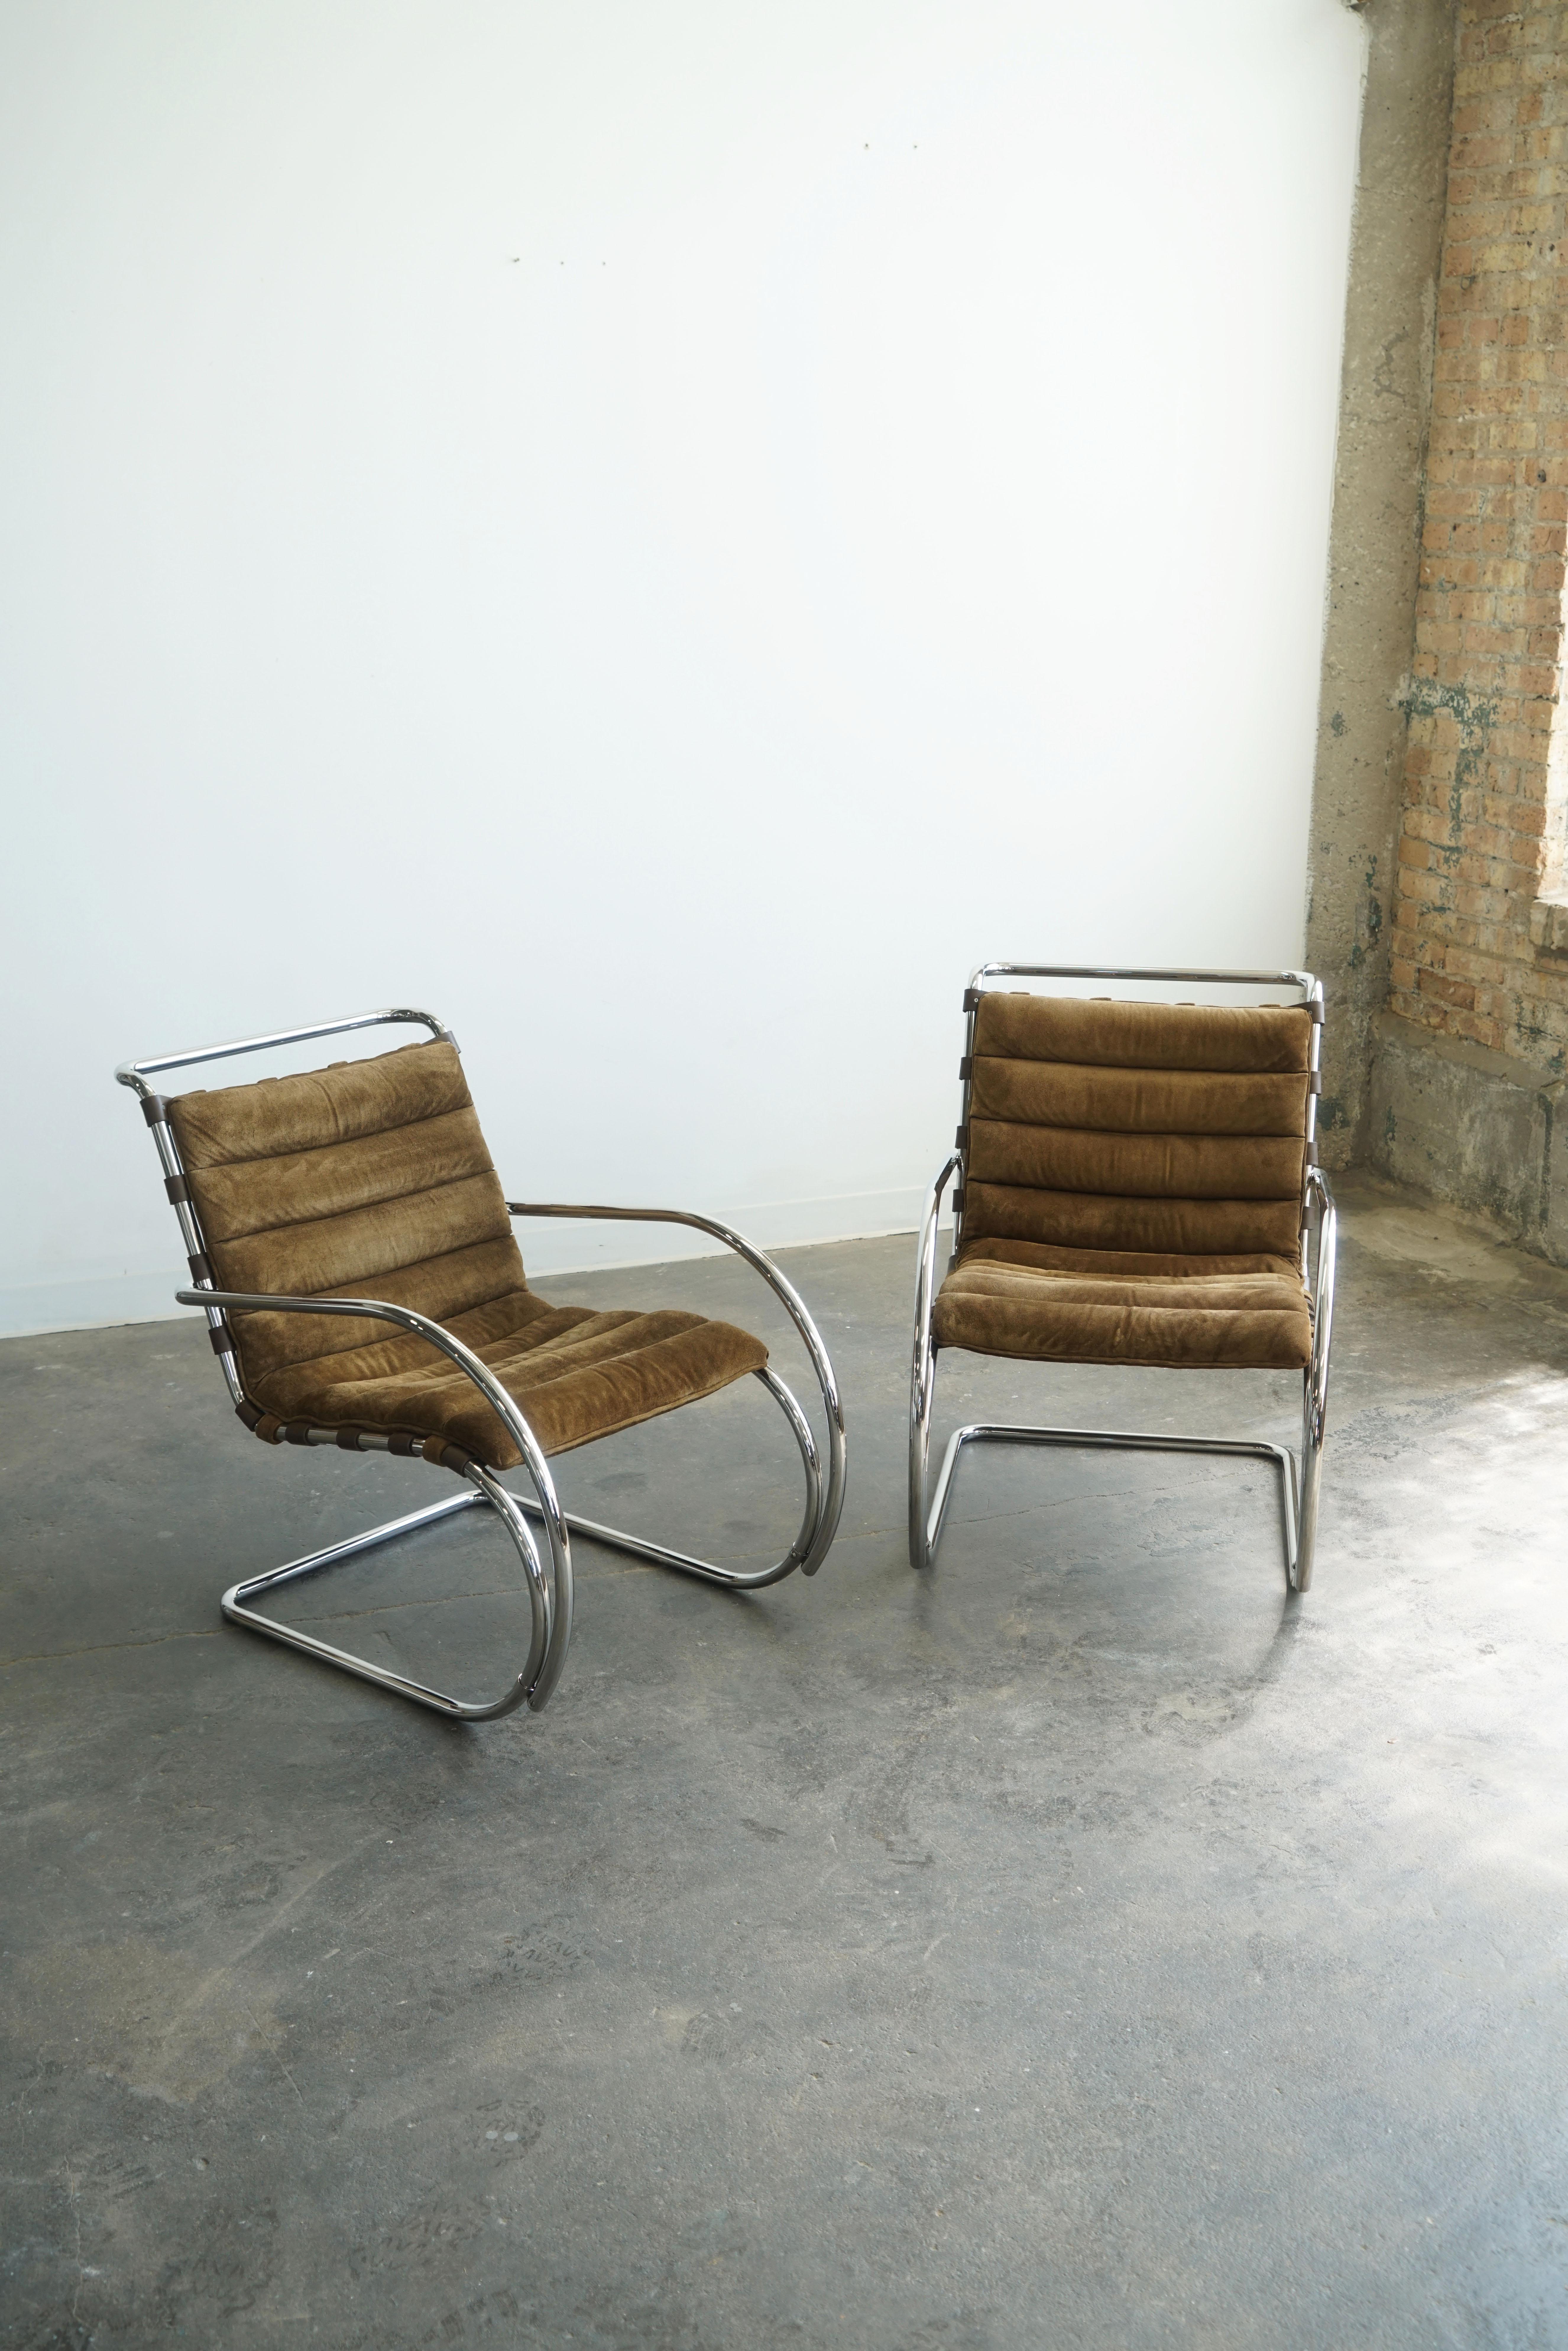 A pair of Mr Lounge Chairs with Arms designed my Mies Van Der Rohe for Knoll.
Brown suede seat pad / tubular chrome steel frame
Leather straps 
Knoll manufacturer labels dating: Nov 1982
Originally designed in 1927.

Price is for the pair. 

Ludwig